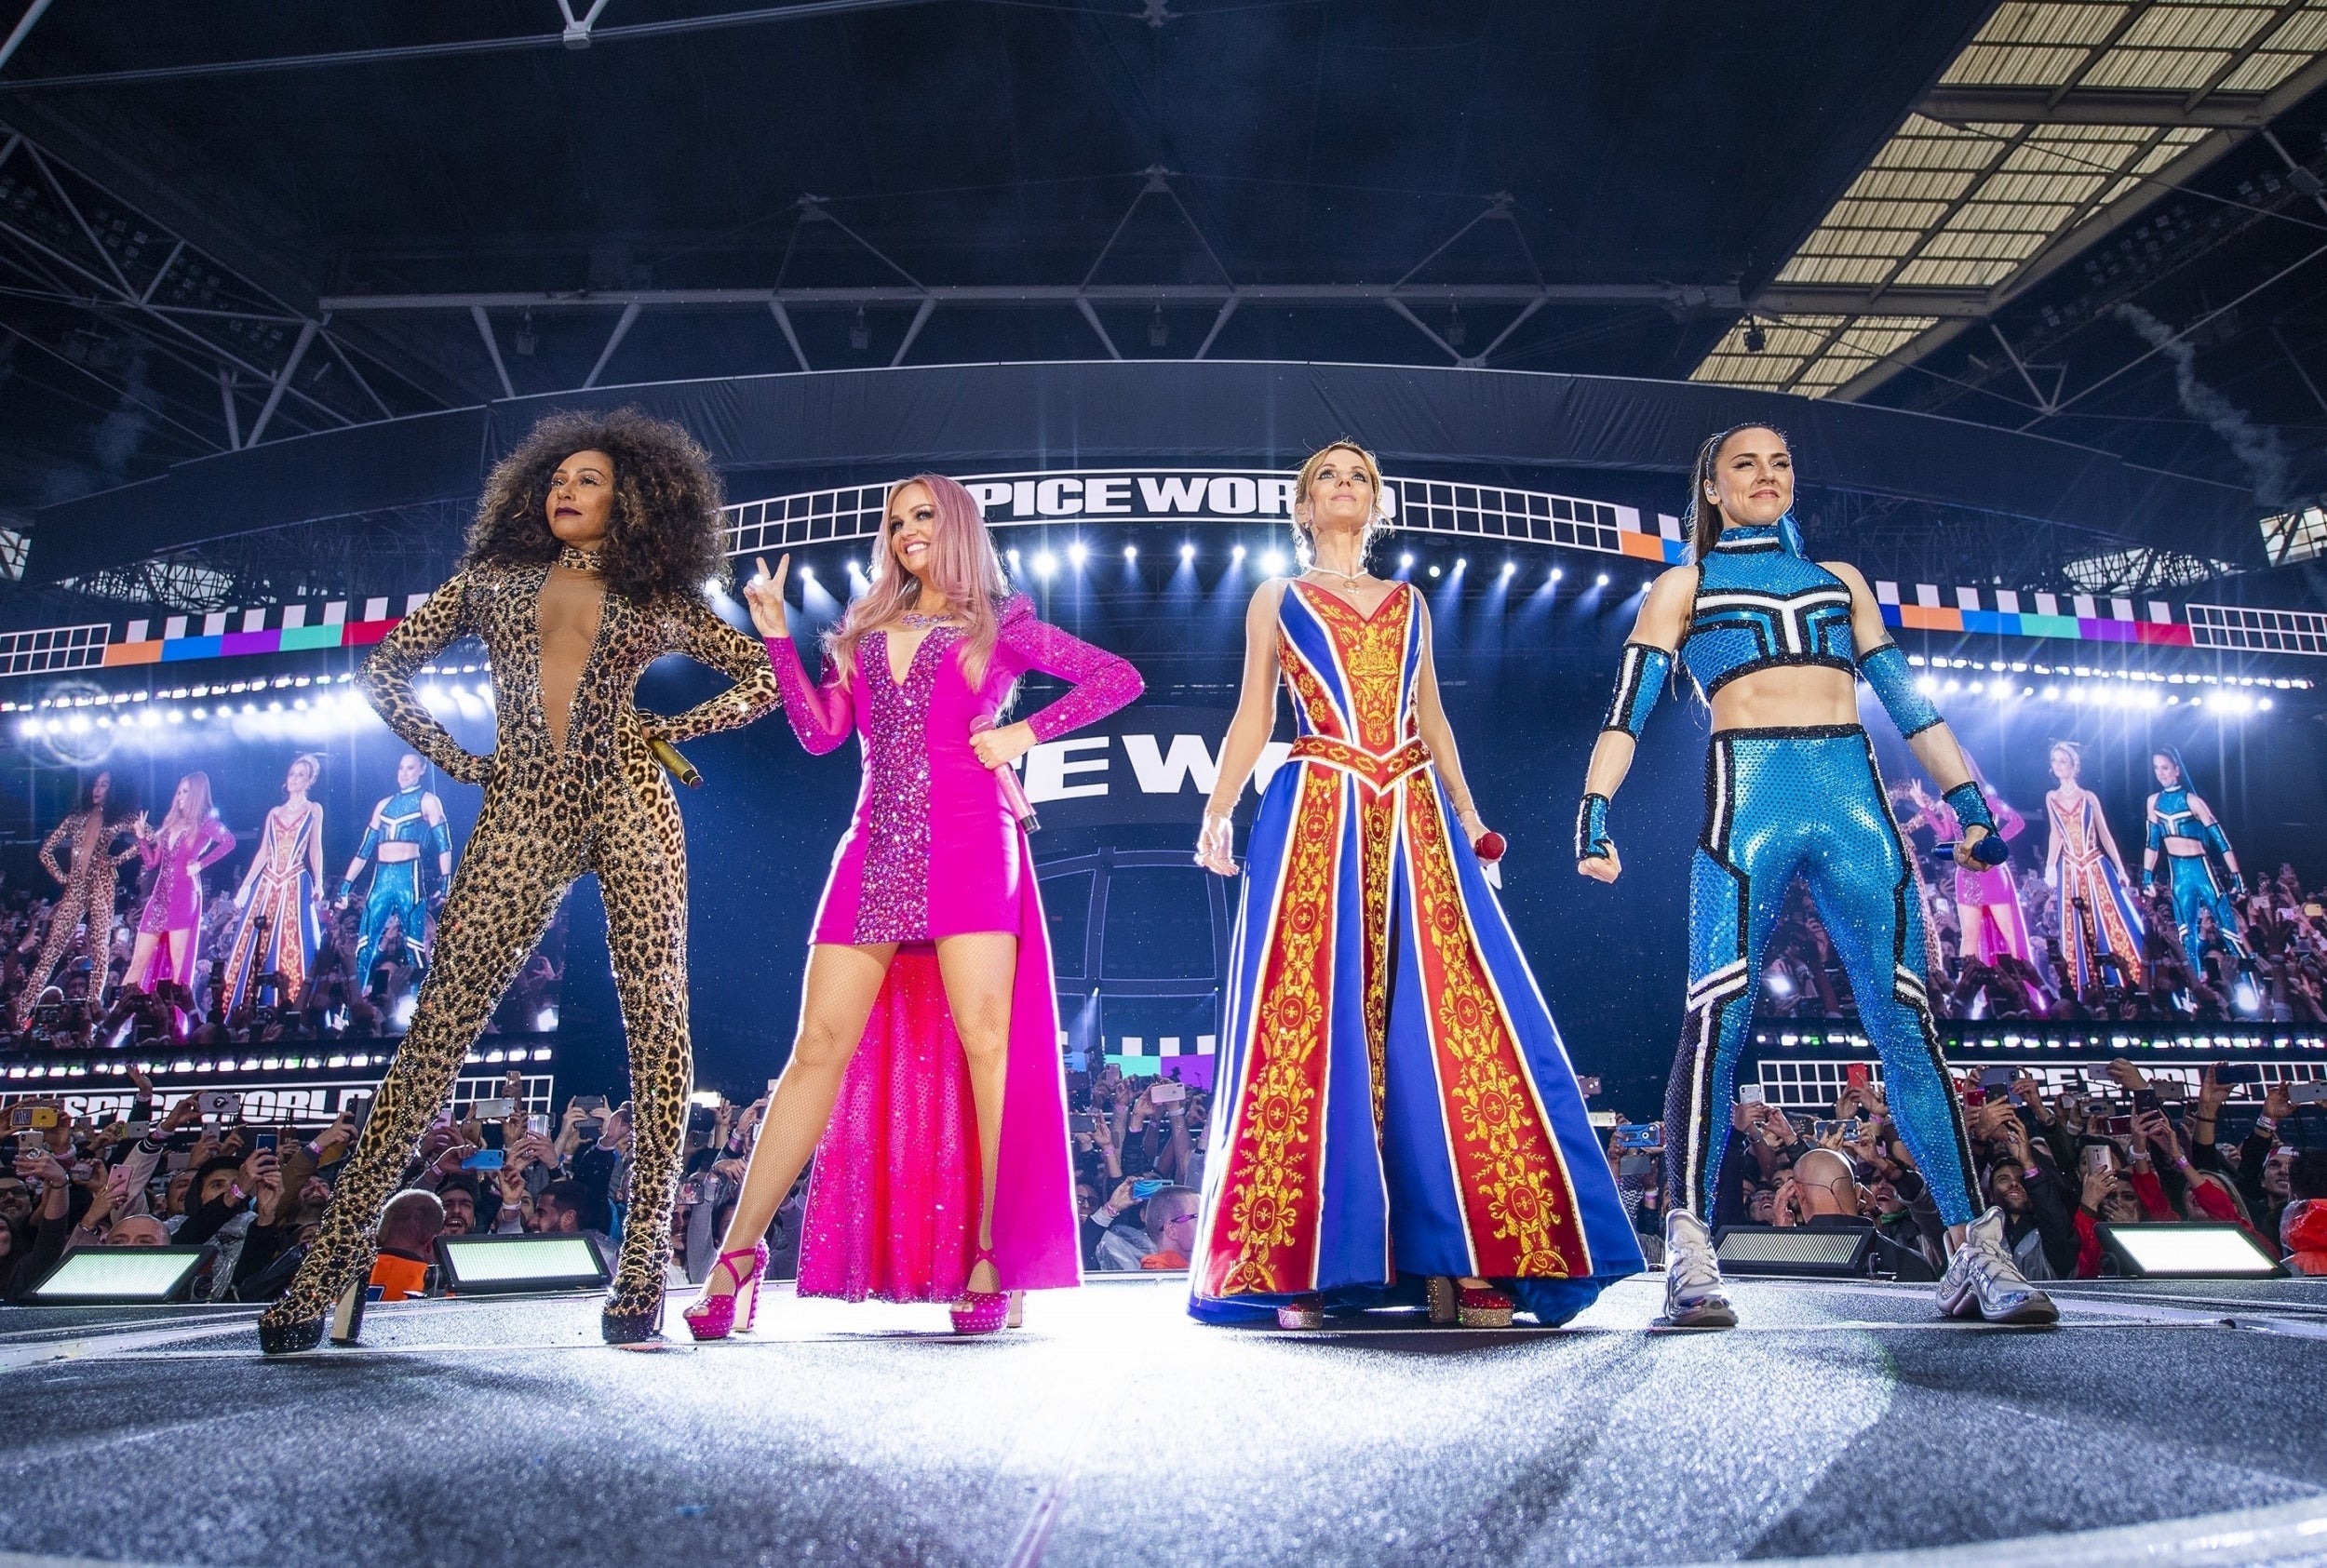 Girl power was back with a bang as the quartet hit the Wembley stage